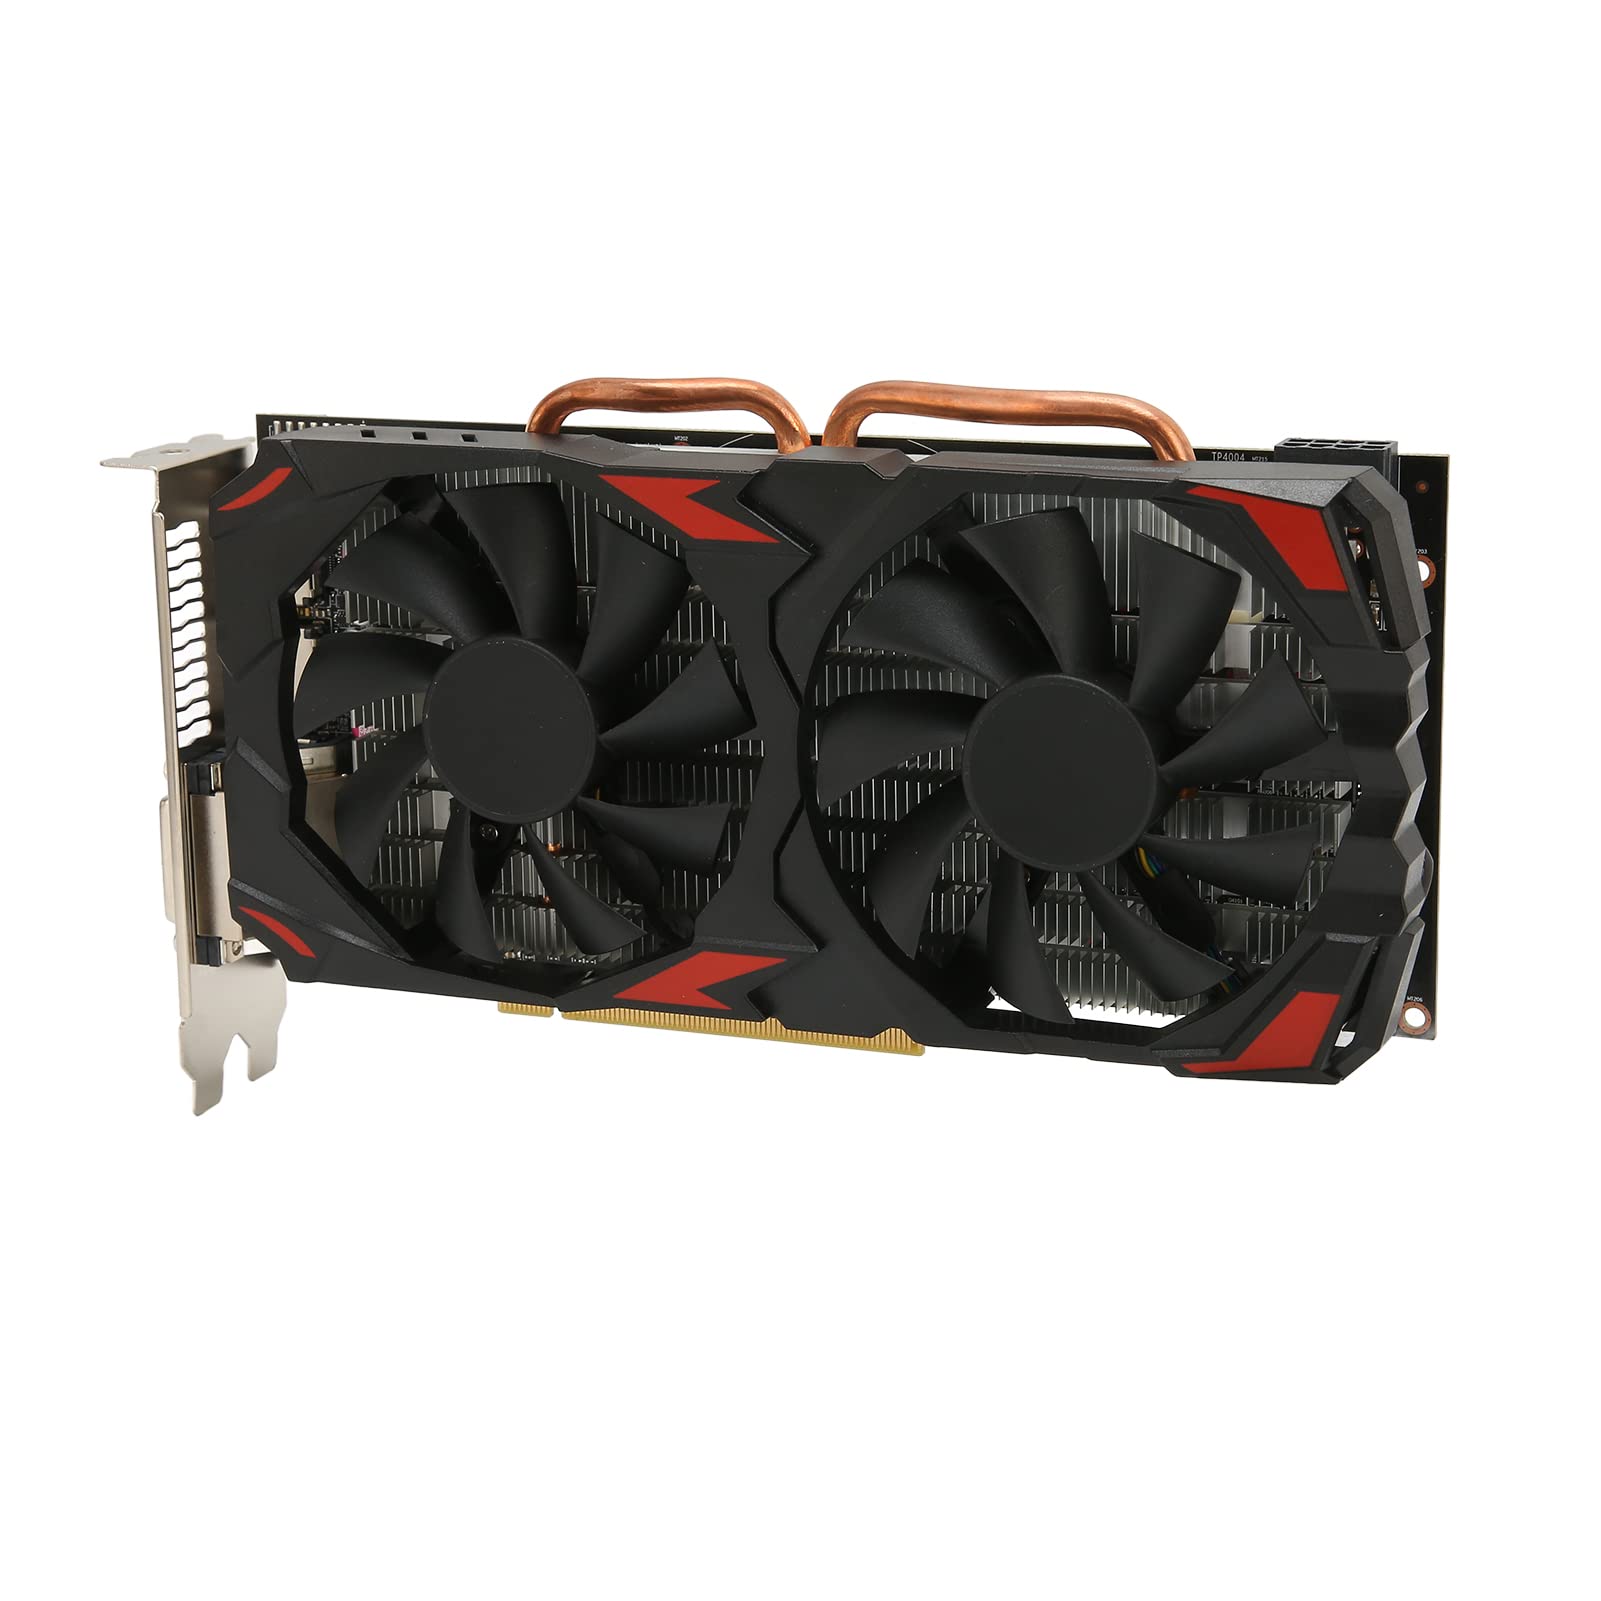 RX 580 Gaming Graphics Card, 8GB GDDR5 256 Bit Video Game Graphics Card, PCI Express 3.0x16, Computer GPU PC Video Cards with Dual Fan Cooling Fan, HDMI, 3*DisplayPort, DVI